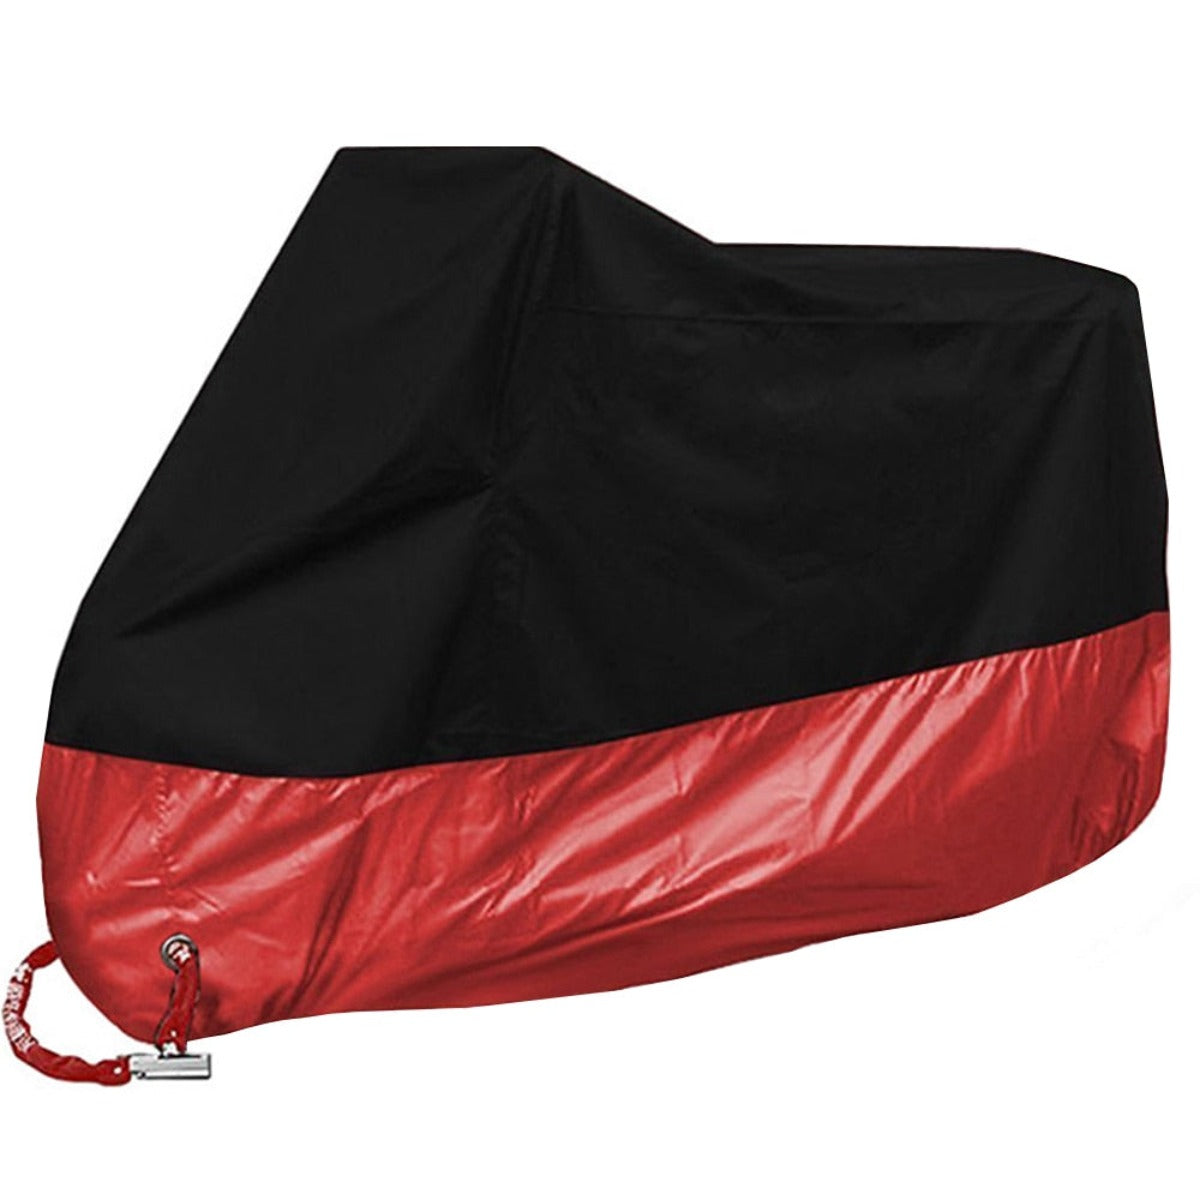 A black and red Waterproof Protective Motorcycle Cover protecting a motorcycle from weather damage on a white background.